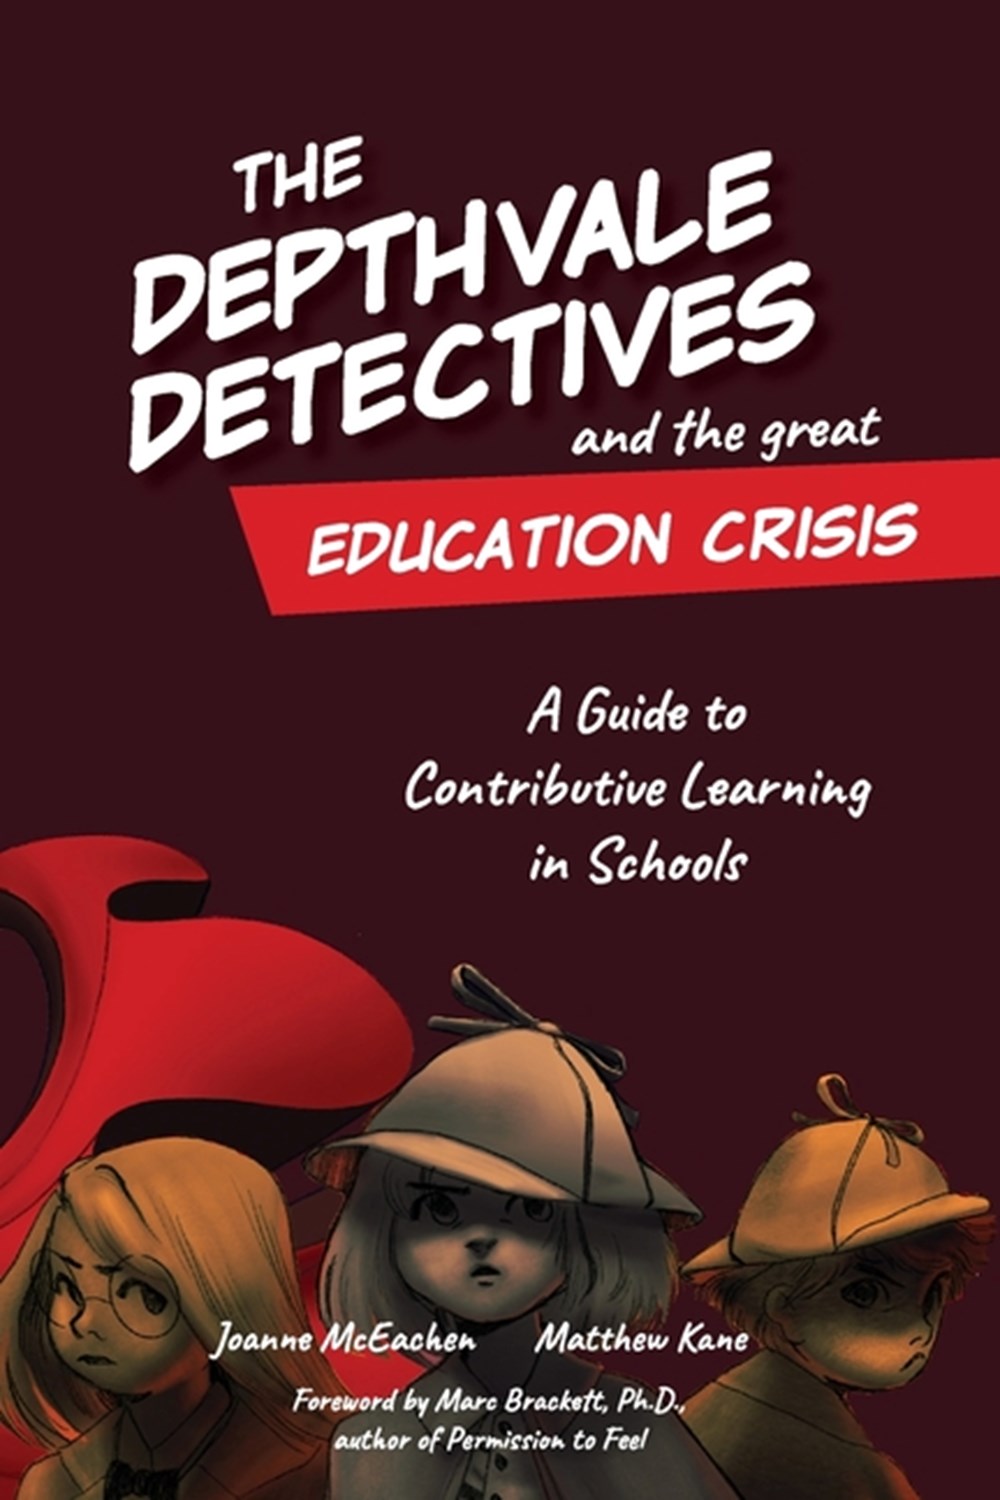 Depthvale Detectives and the Great Education Crisis: A Guide to Contributive Learning in Schools